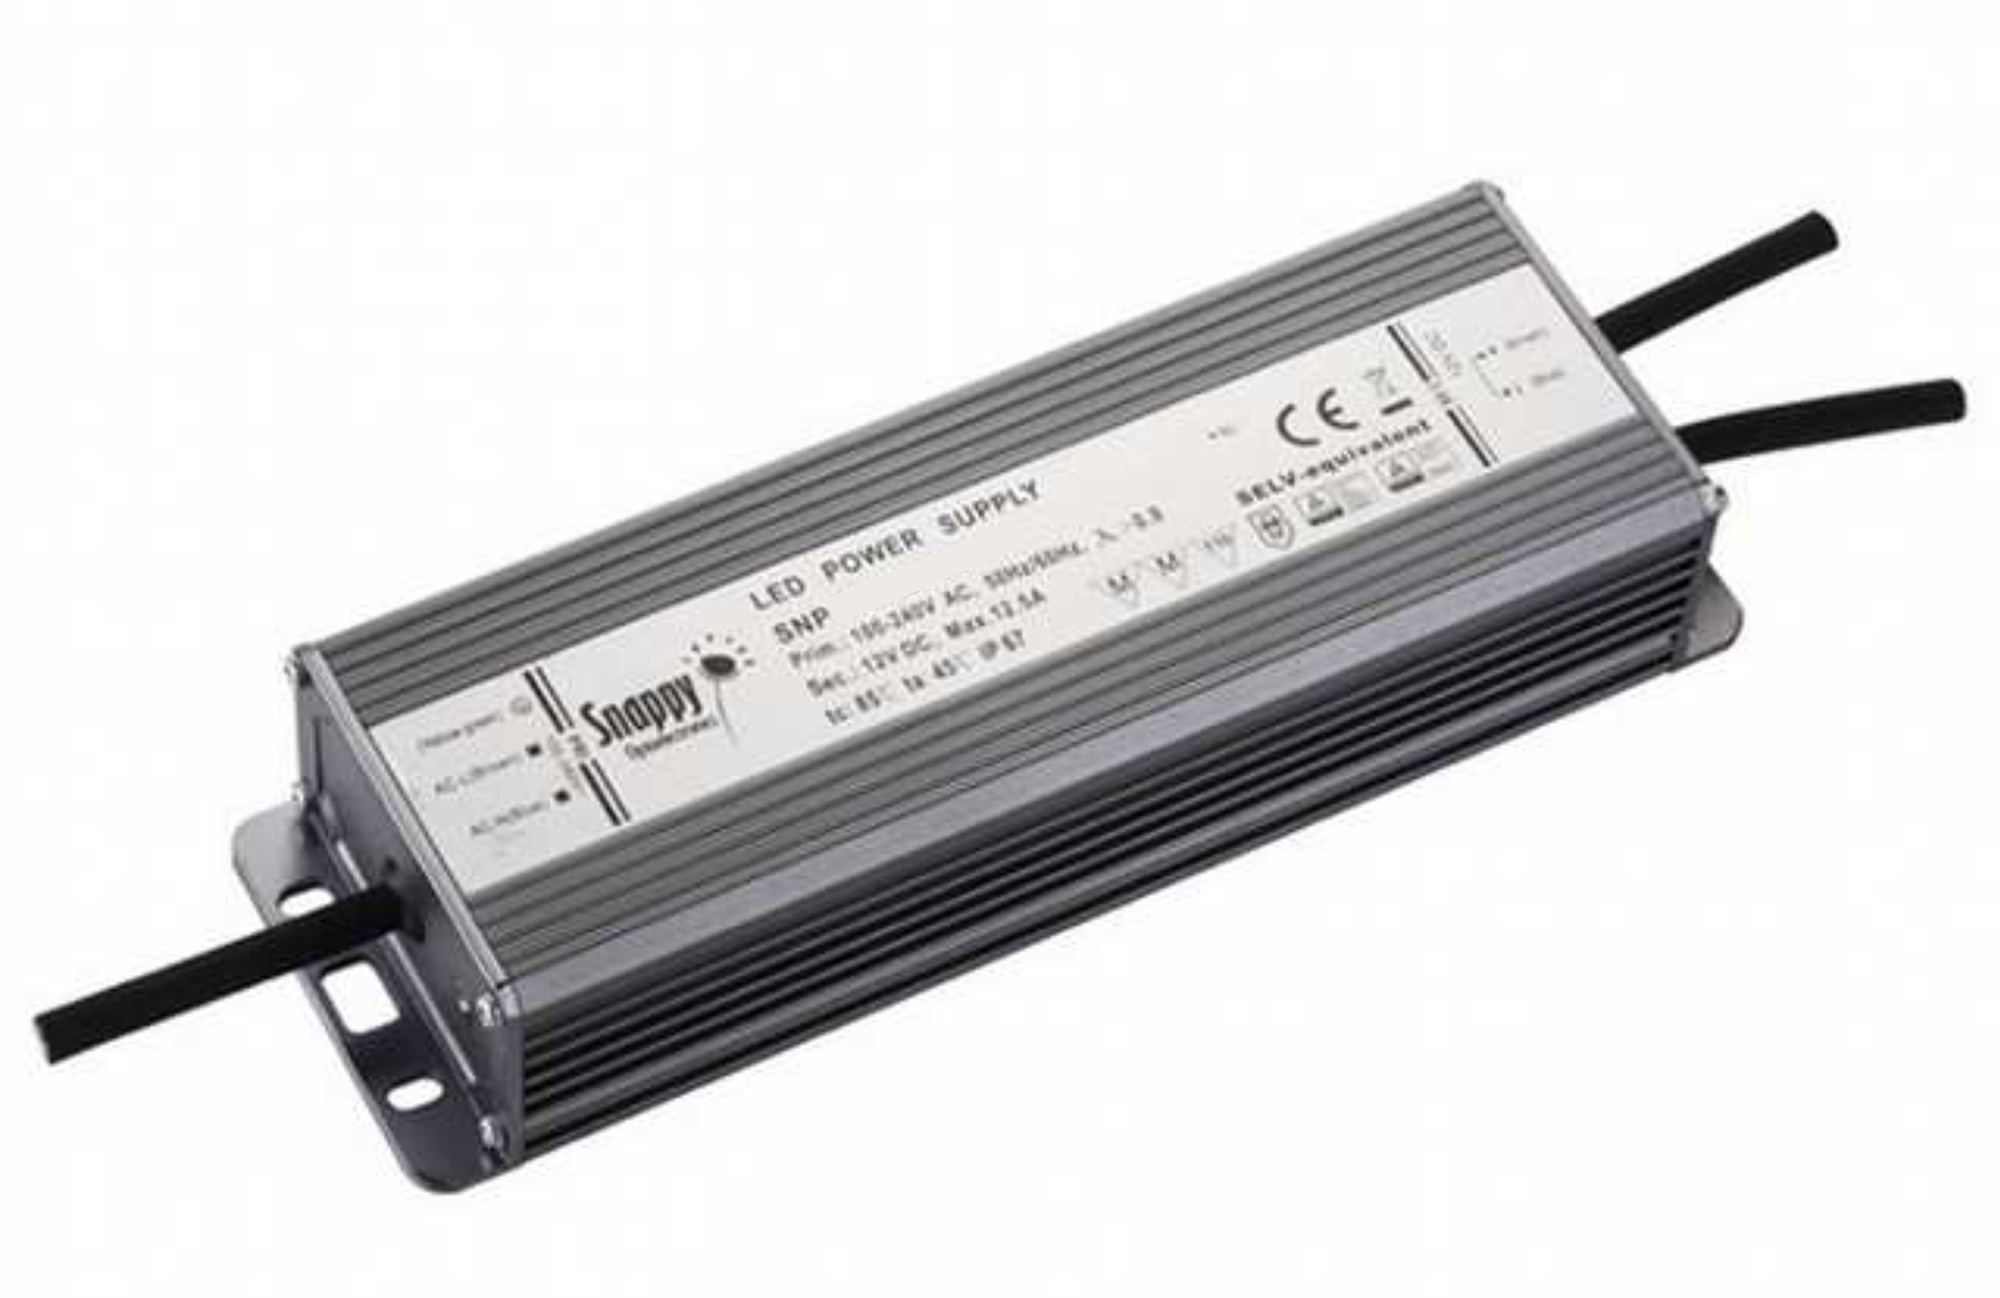 SPE320-24VLP  SPE, 320W, Constant Voltage Non Dimmable Aluminum LED Driver, 24VDC, 13.4A, Pf>0.9, TC:+90?, TA:45?, IP67, Effi>90%, Screw Connection, 3yrs Warranty.